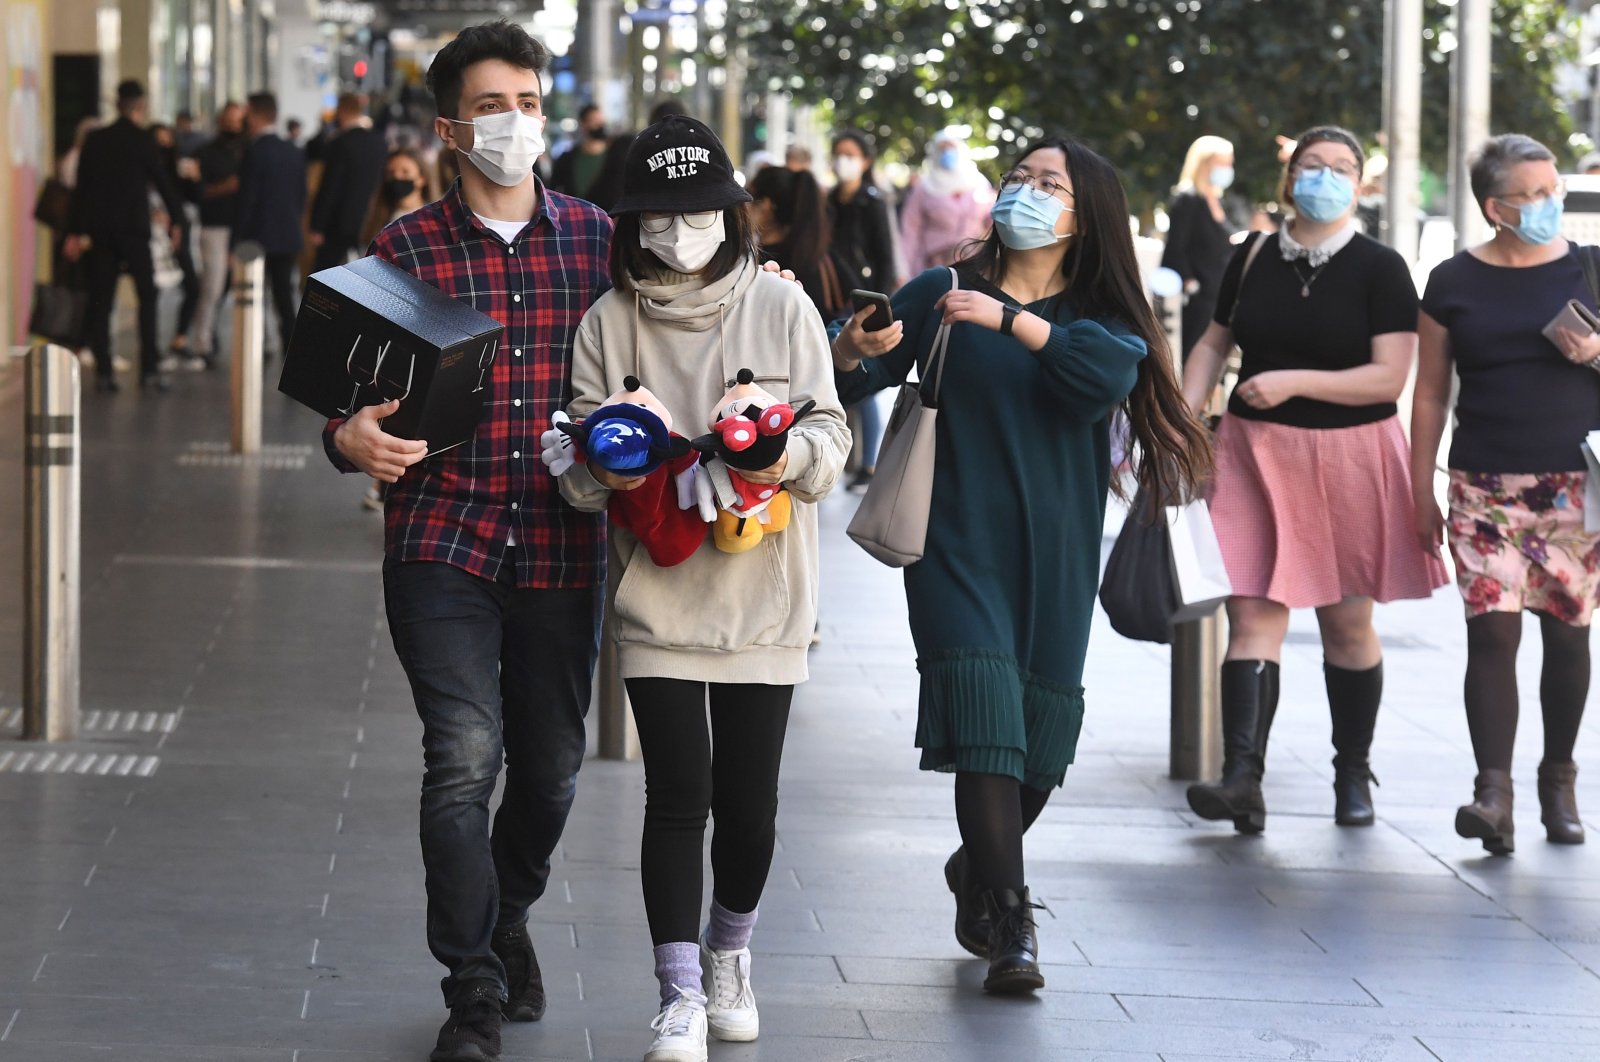 People visit a shopping area after measures to curb the spread of the COVID-19 coronavirus were eased allowing limited numbers of people back into shops, bars, cafes and restaurants in Melbourne, Oct. 28, 2020. (AFP Photo)